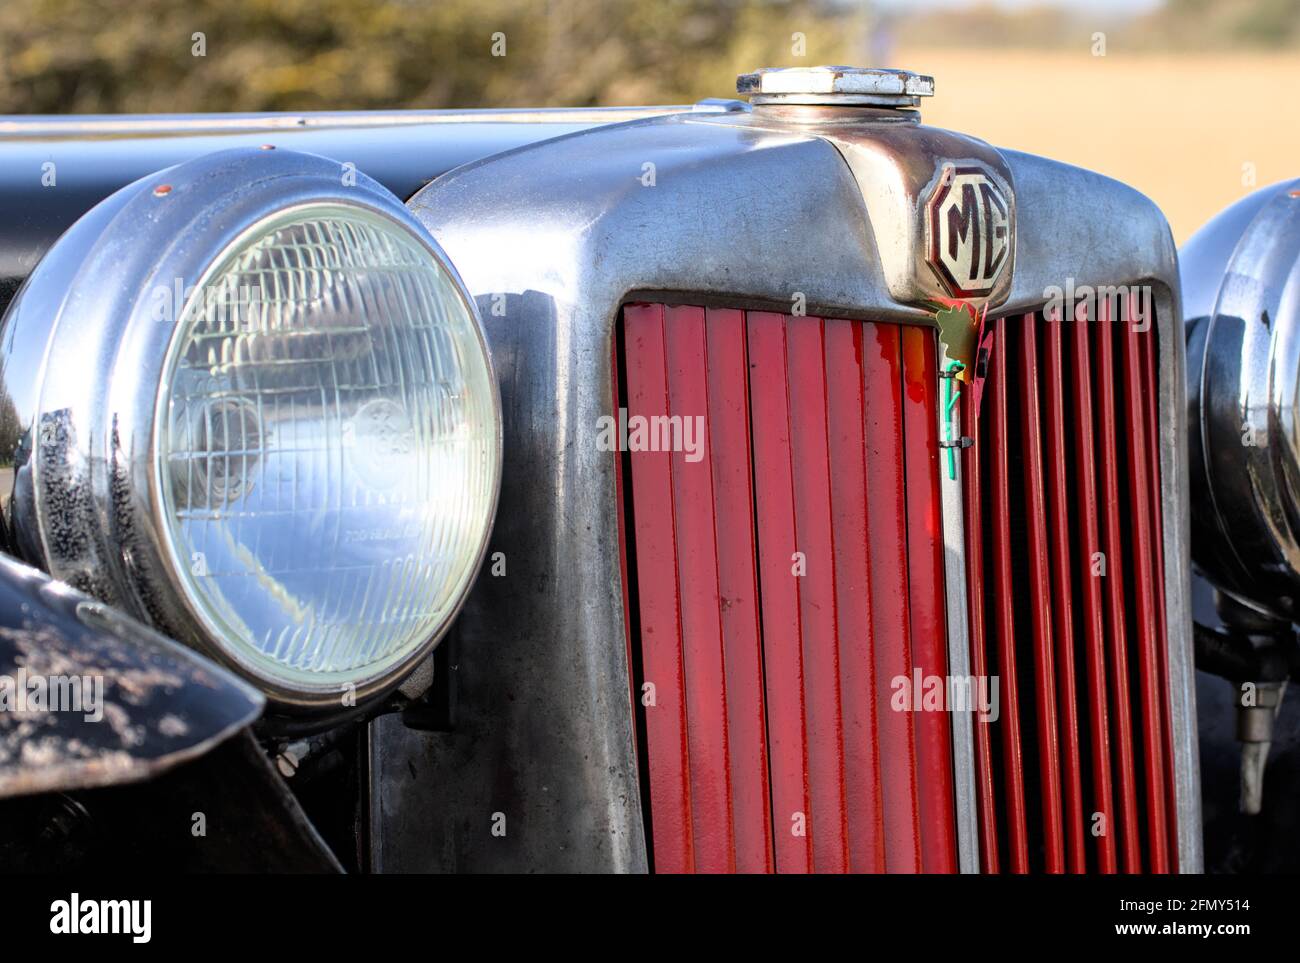 Front Of A 1936 MG Magnette N-Type Motor Car Showing Red Radiator Grill, MG Badge And Round Headlights, England UK Stock Photo